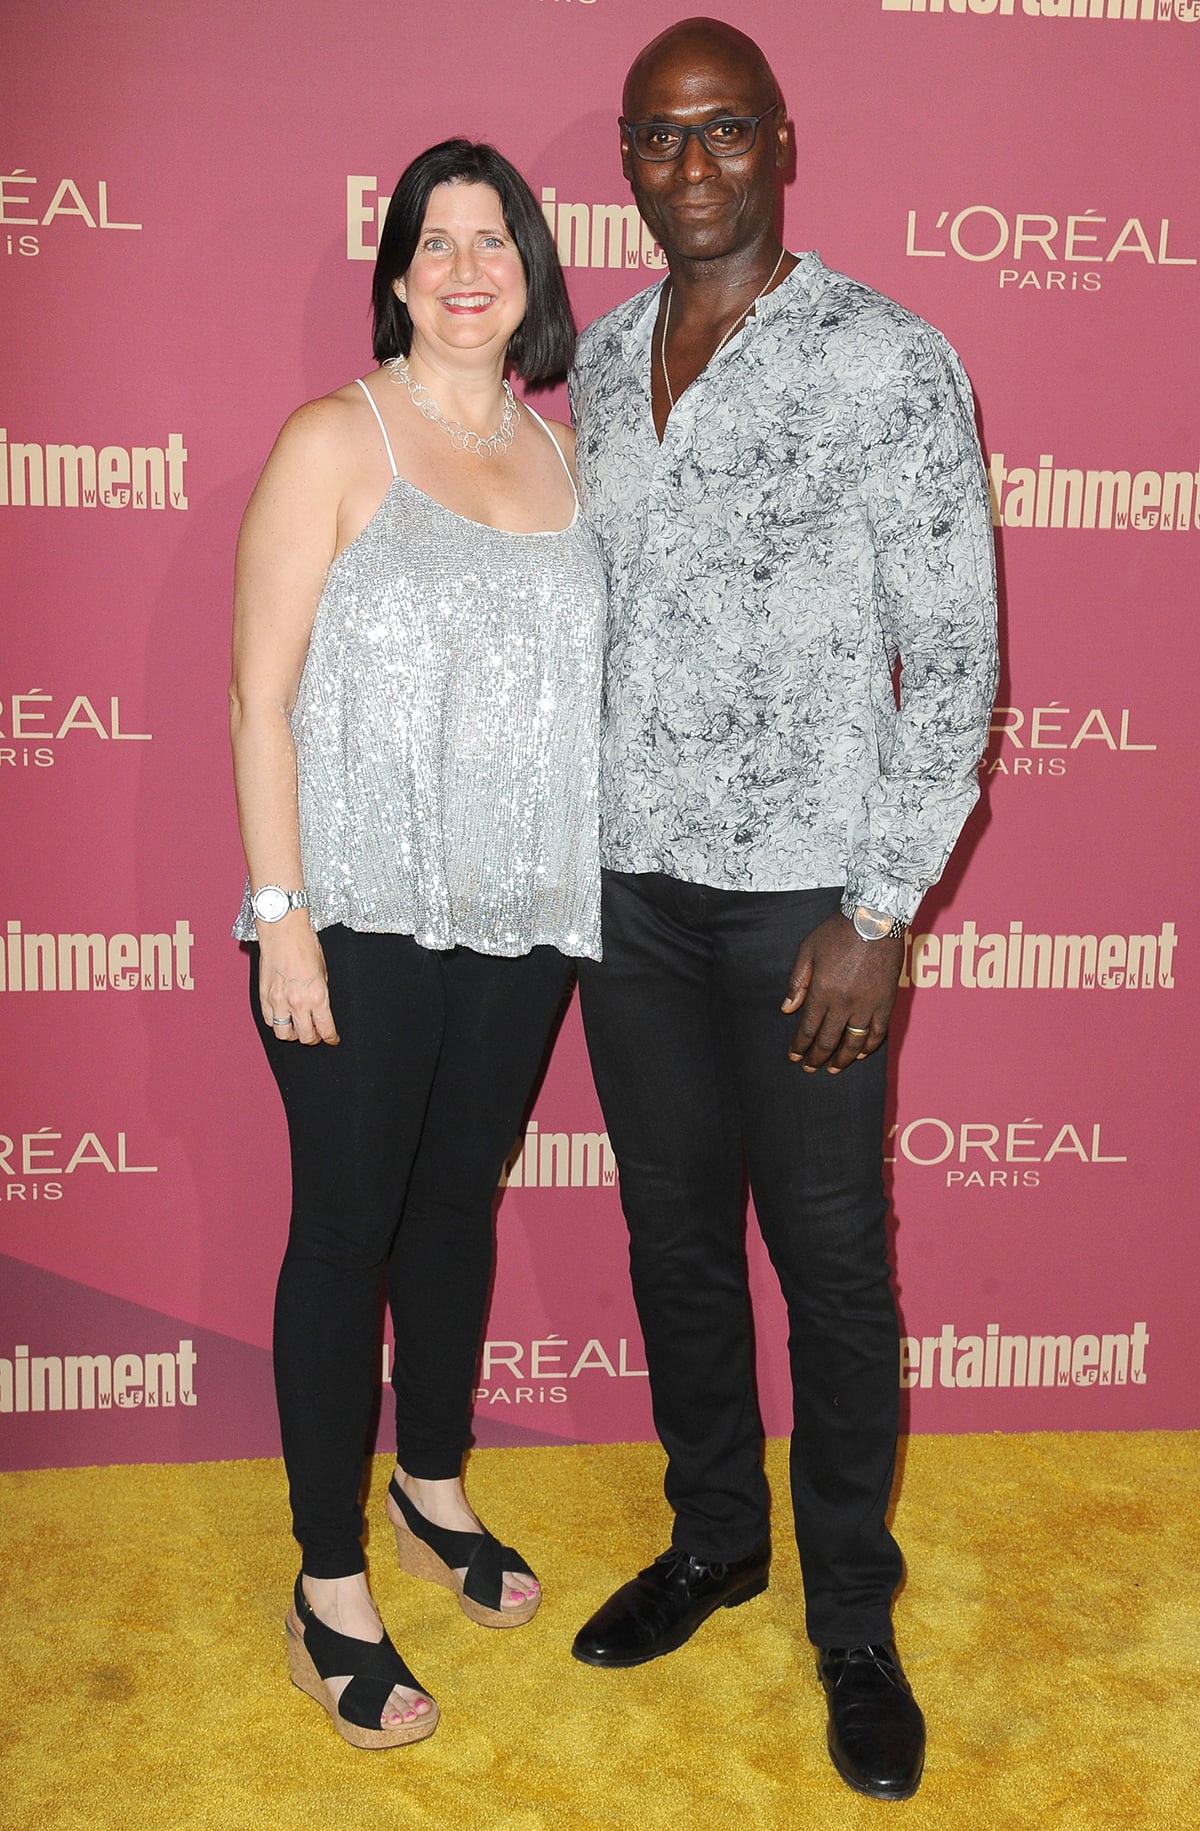 Lance Reddick leaves behind his wife, Stephanie, and their two children, Yvonne Nicole and Christopher